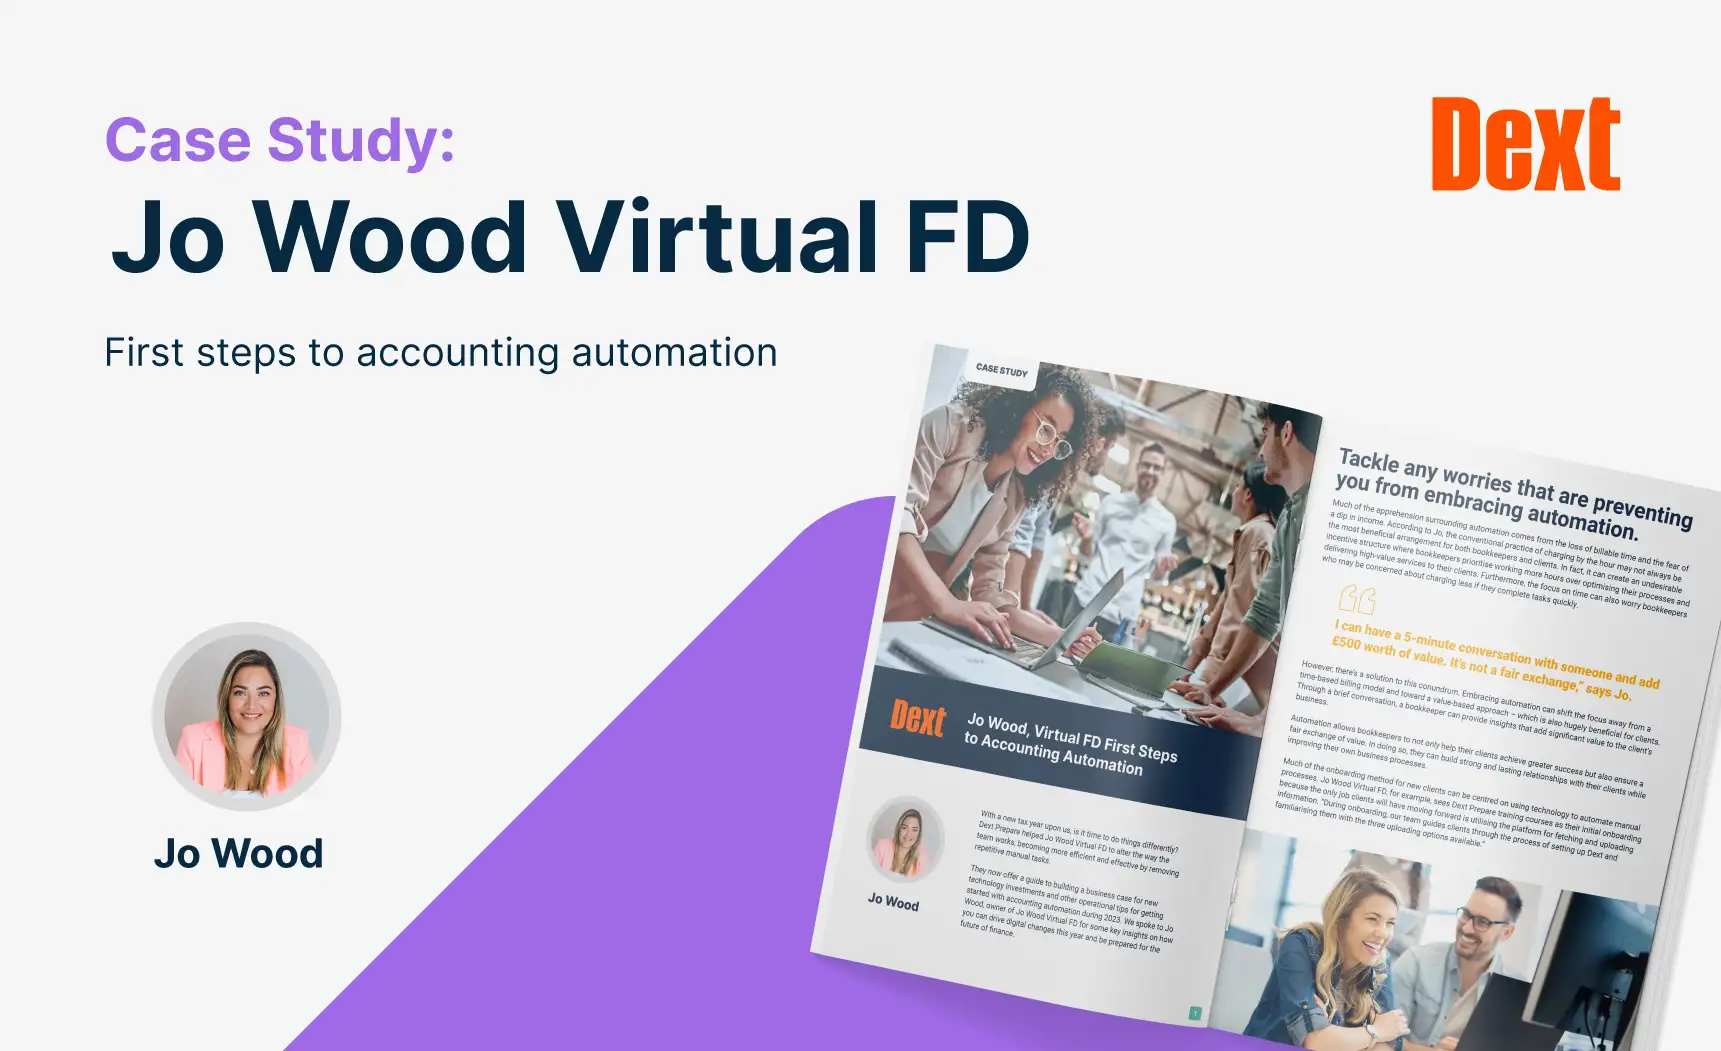 Jo Wood Virtual FD’s First Steps to Accounting Automation logo